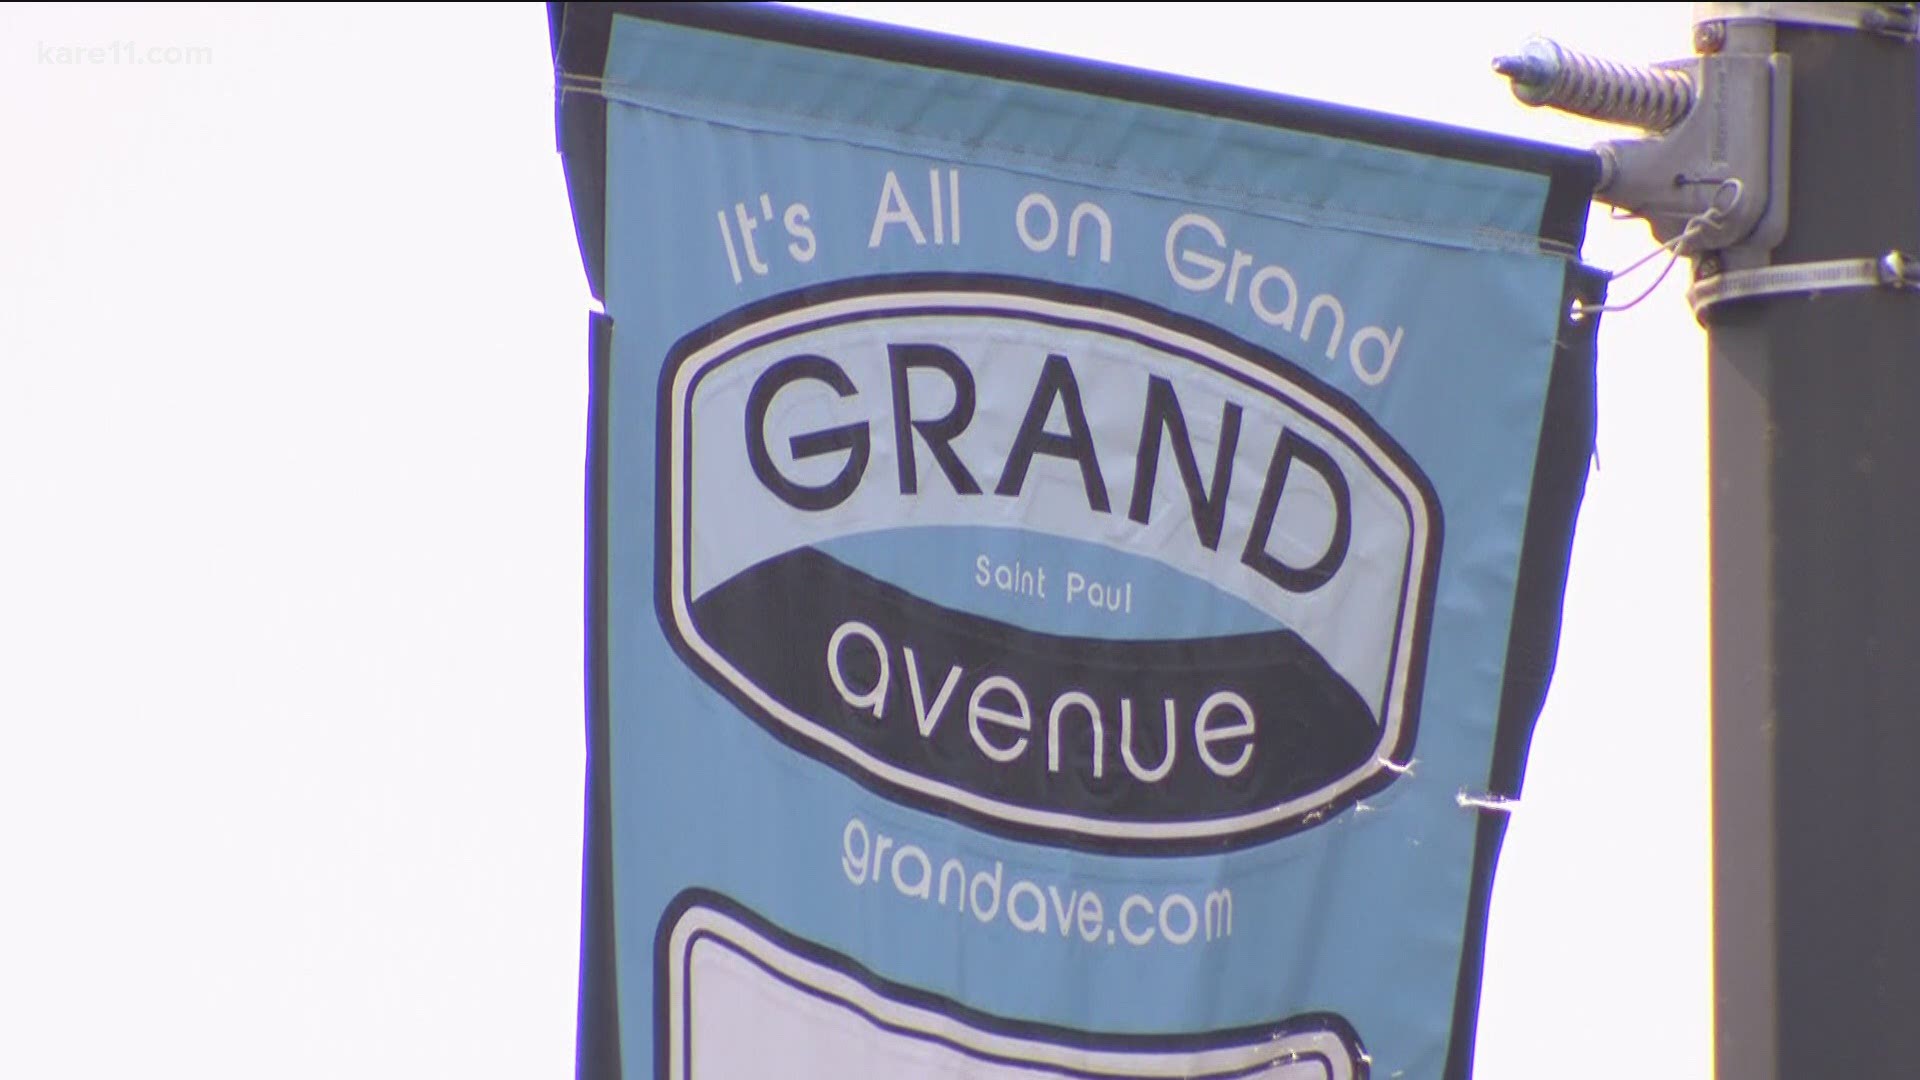 The Grand Avenue Business Association, which plans the annual event, currently has just five members.